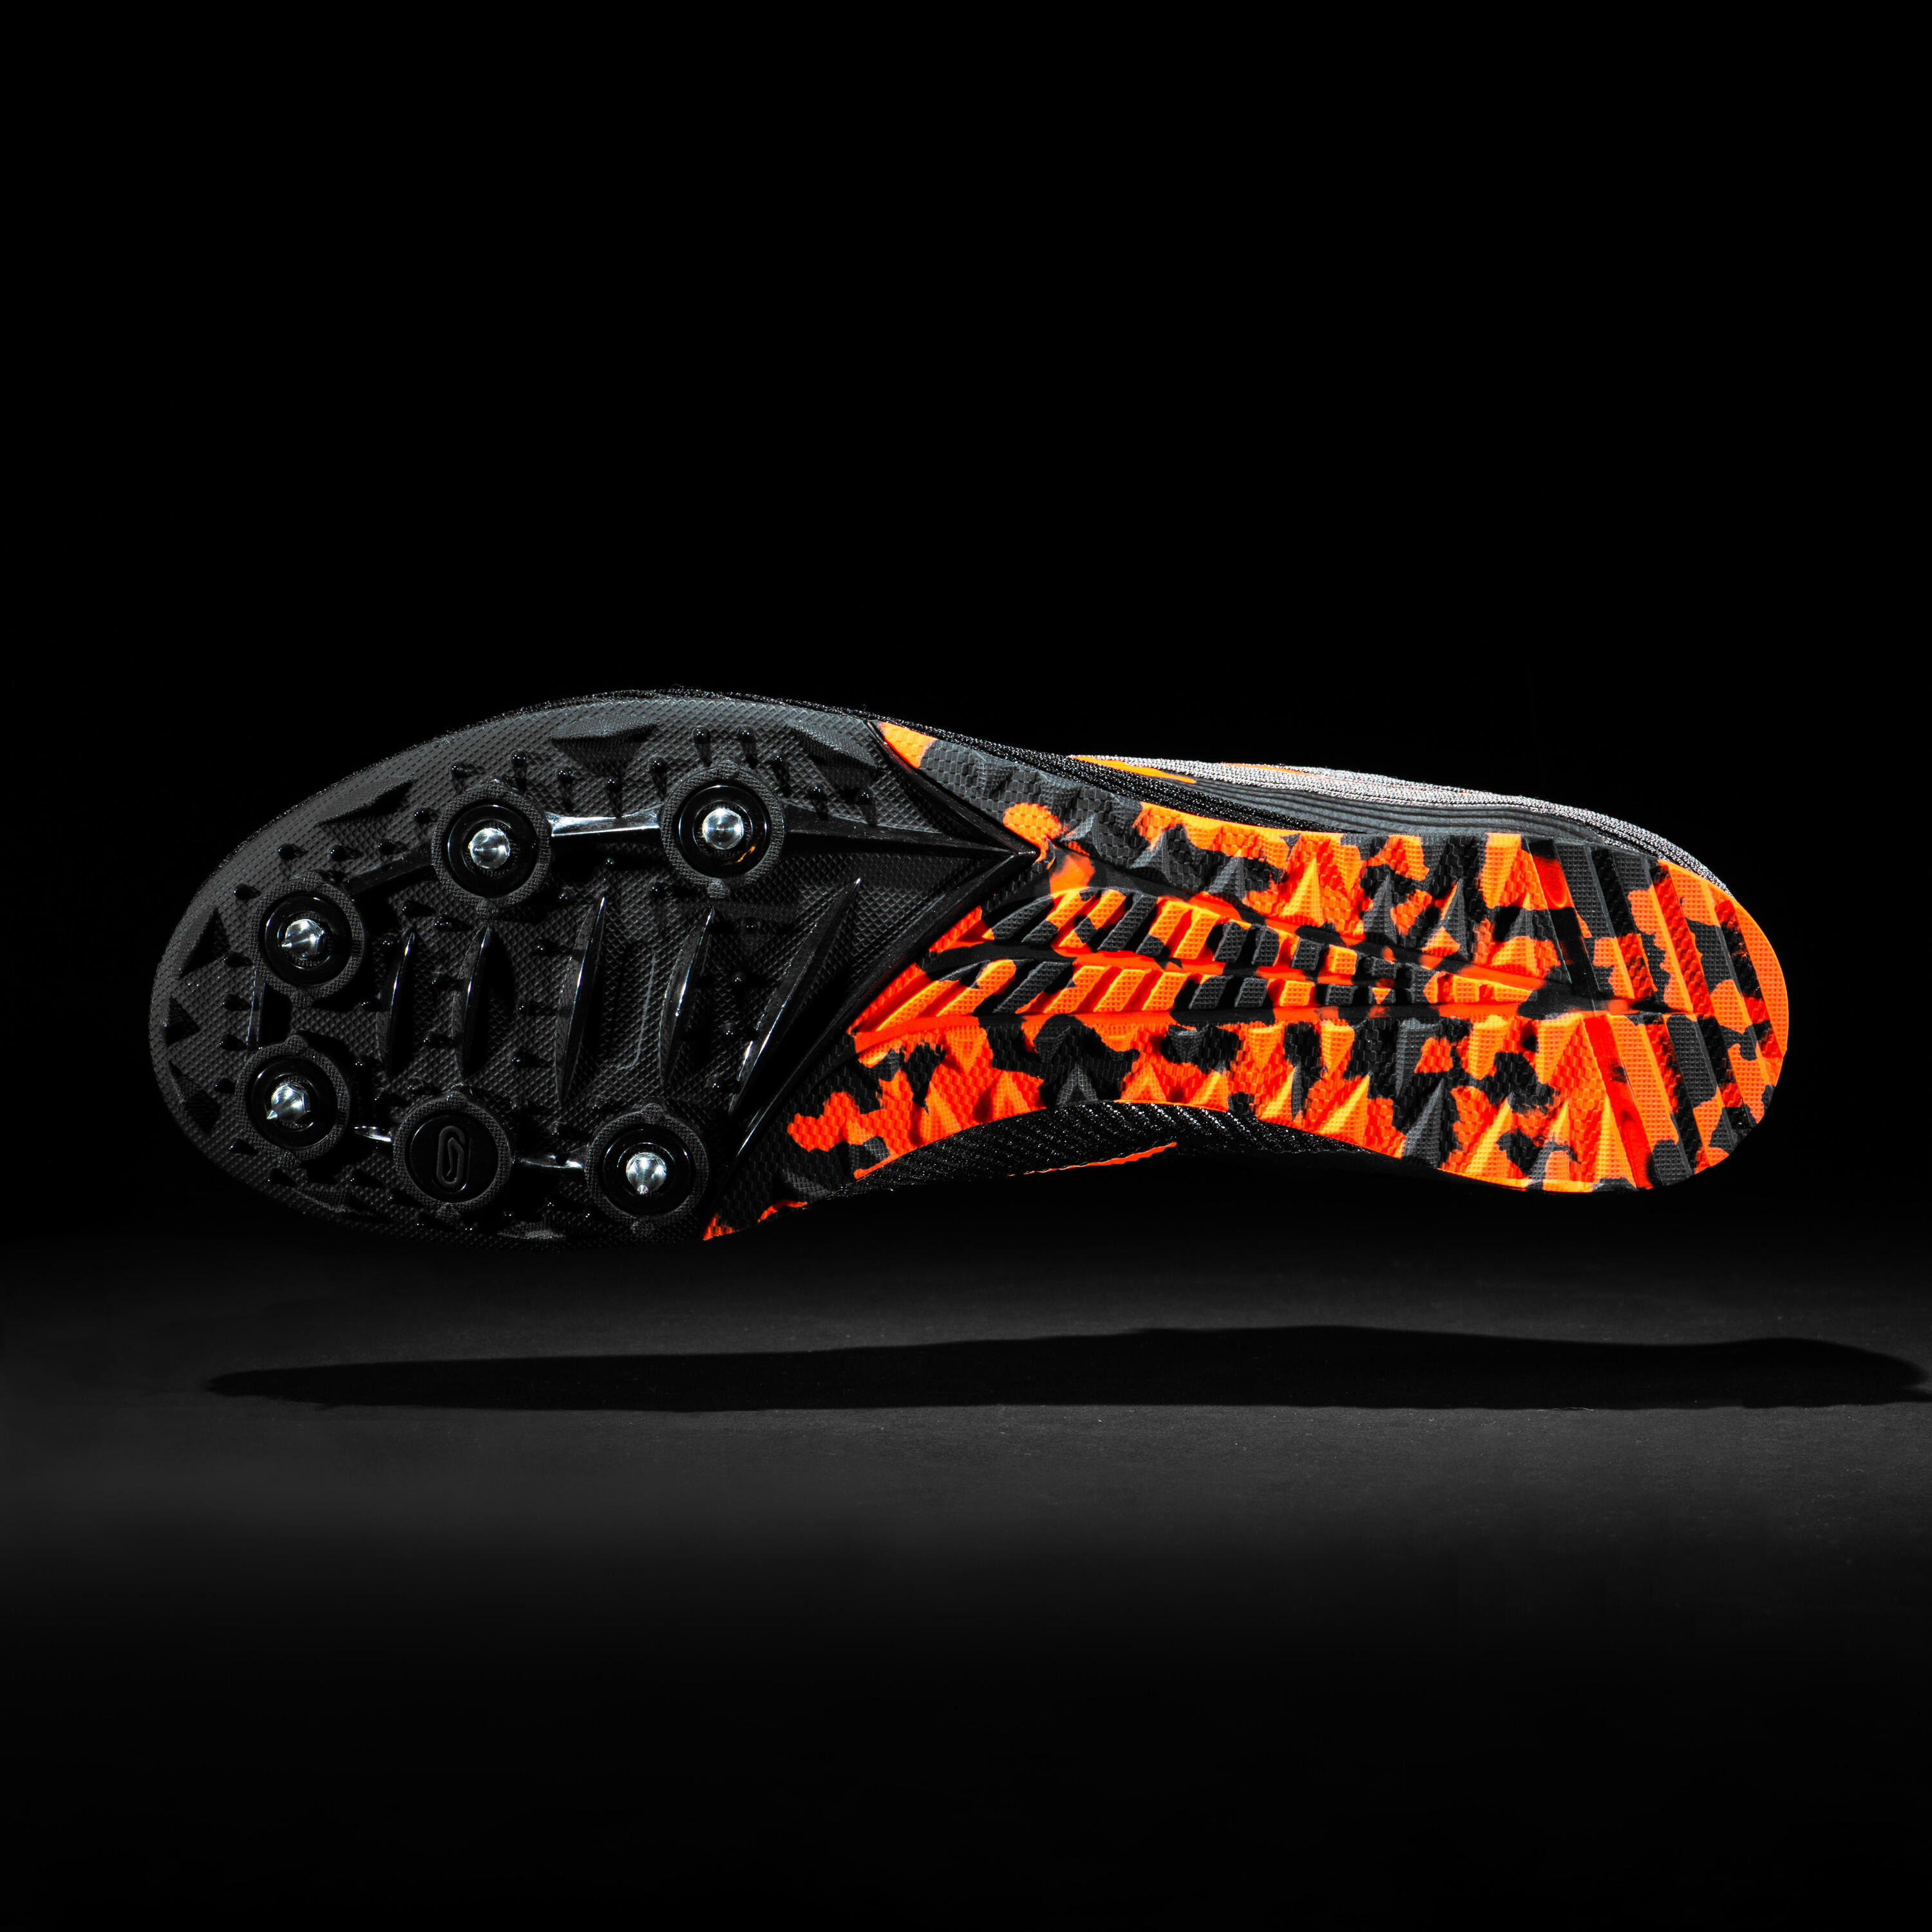 ATHLETICS CROSS-COUNTRY SHOES WITH SPIKES - BLACK/ORANGE 4/8